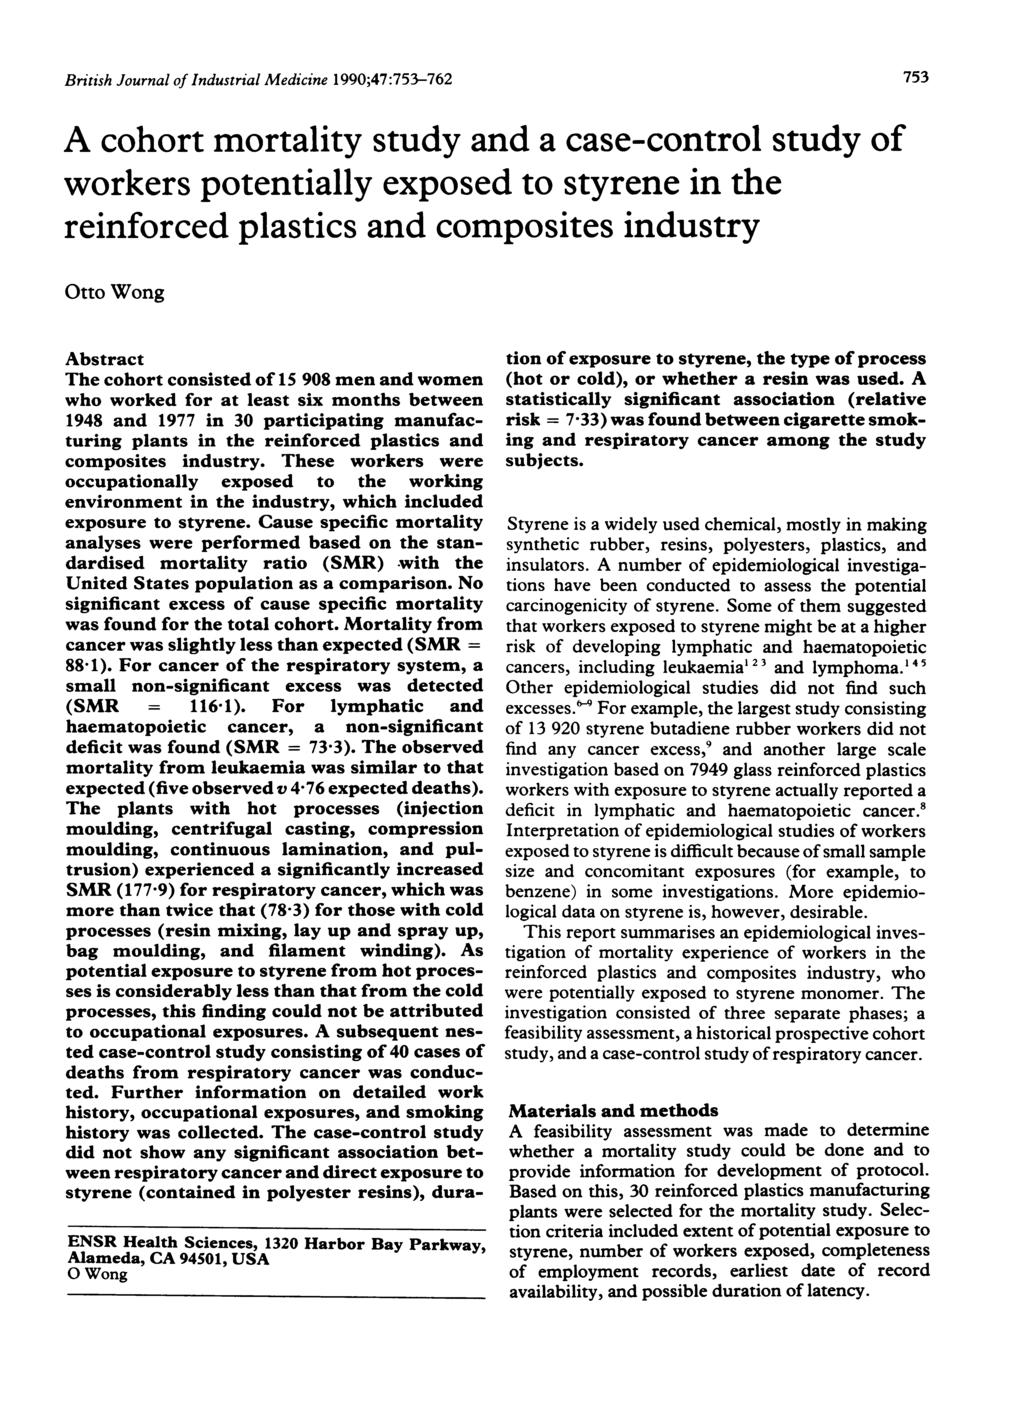 British Journal of Industrial Medicine 1990;47:753-762 A cohort mortality study and a case-control study of workers potentially exposed to styrene in the reinforced plastics and composites industry